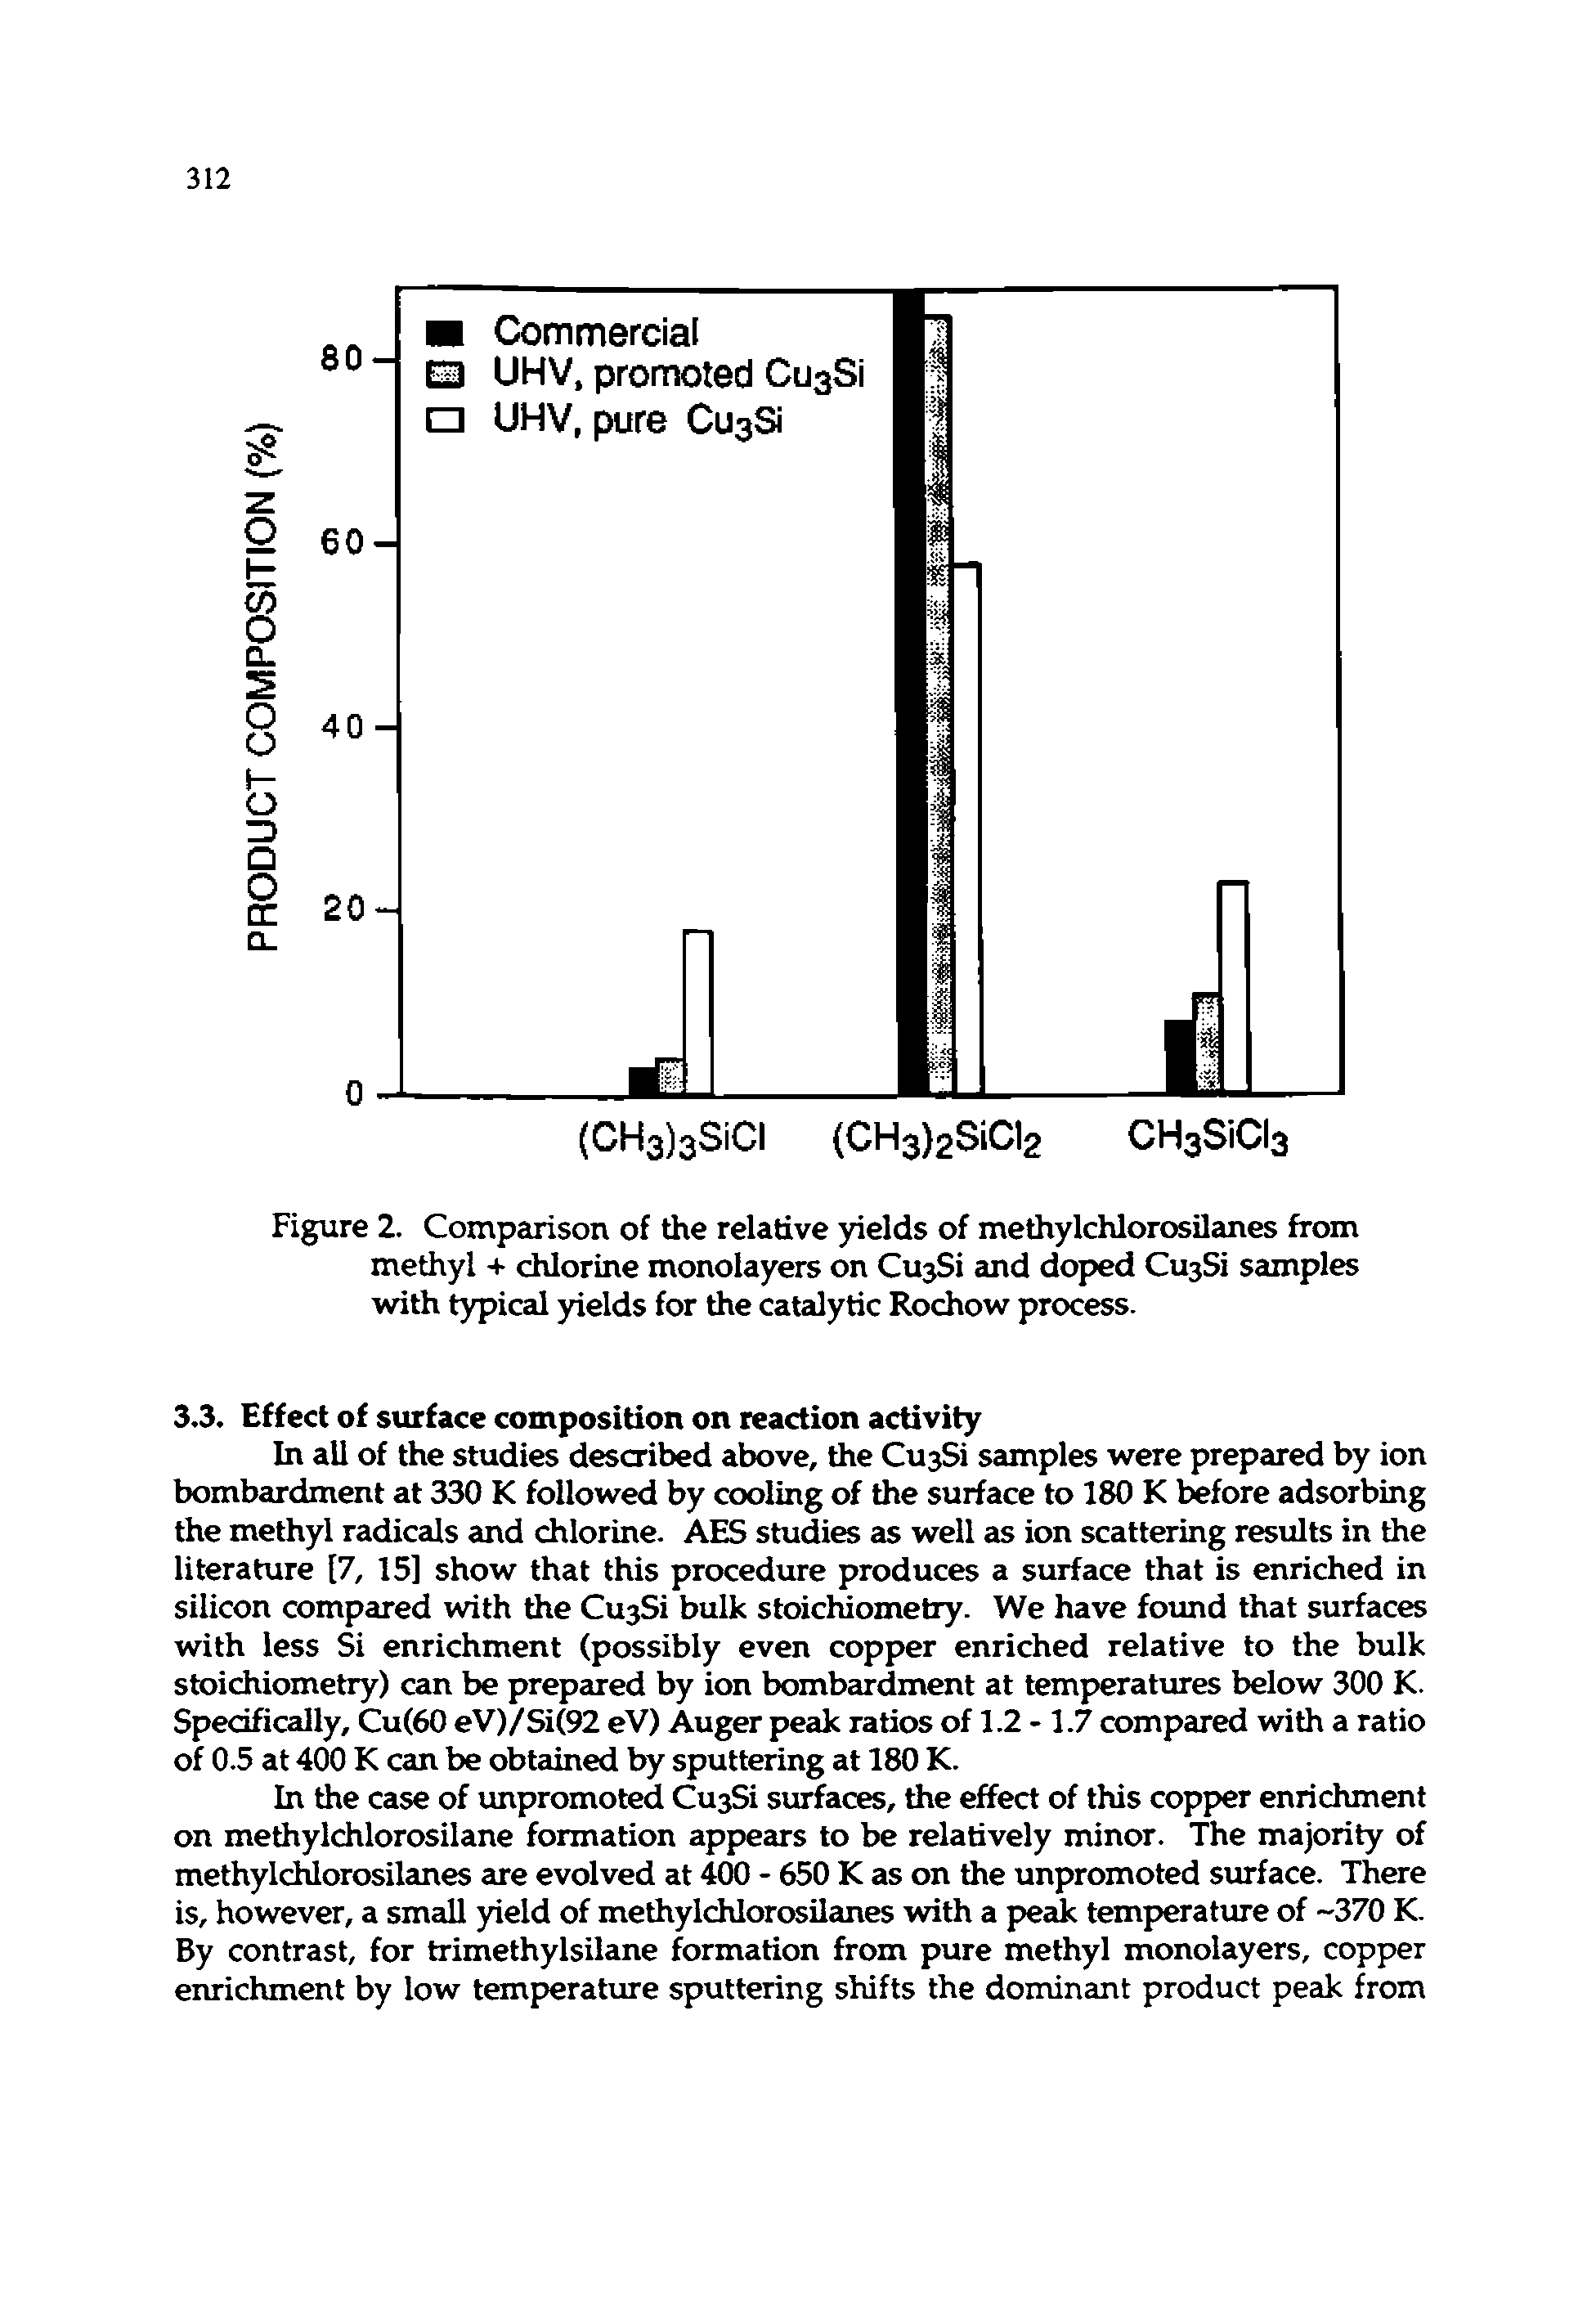 Figure 2. Comparison of the relative yields of methylchlorosilanes from methyl + chlorine monolayers on Cu3Si and doped CuaSi samples with typical yields for the catalytic Rochow process.